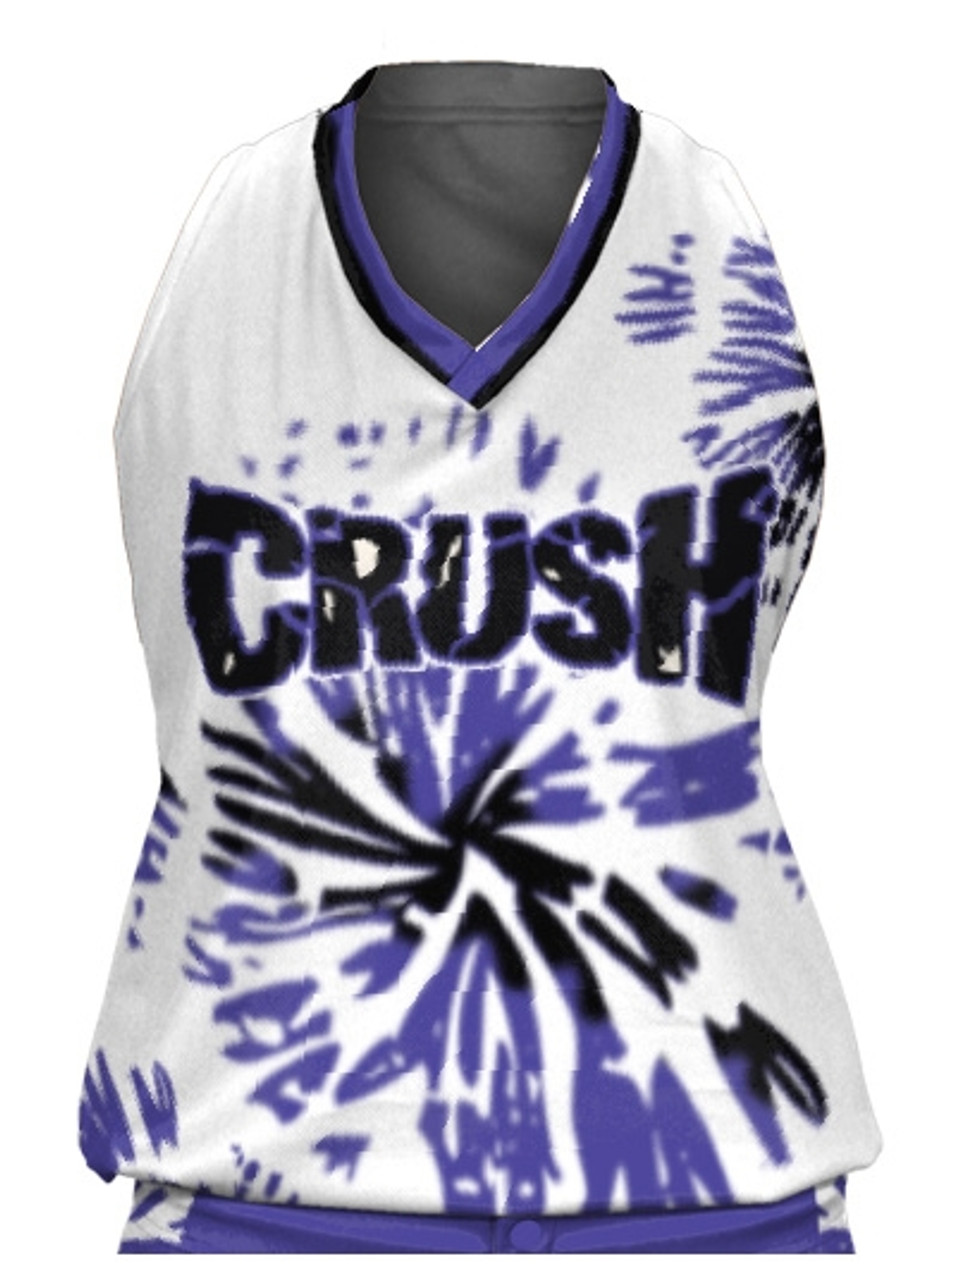 Control Series Premium - Womens/Girls Ombre Custom Sublimated Sleeveless Button Front Softball Jersey